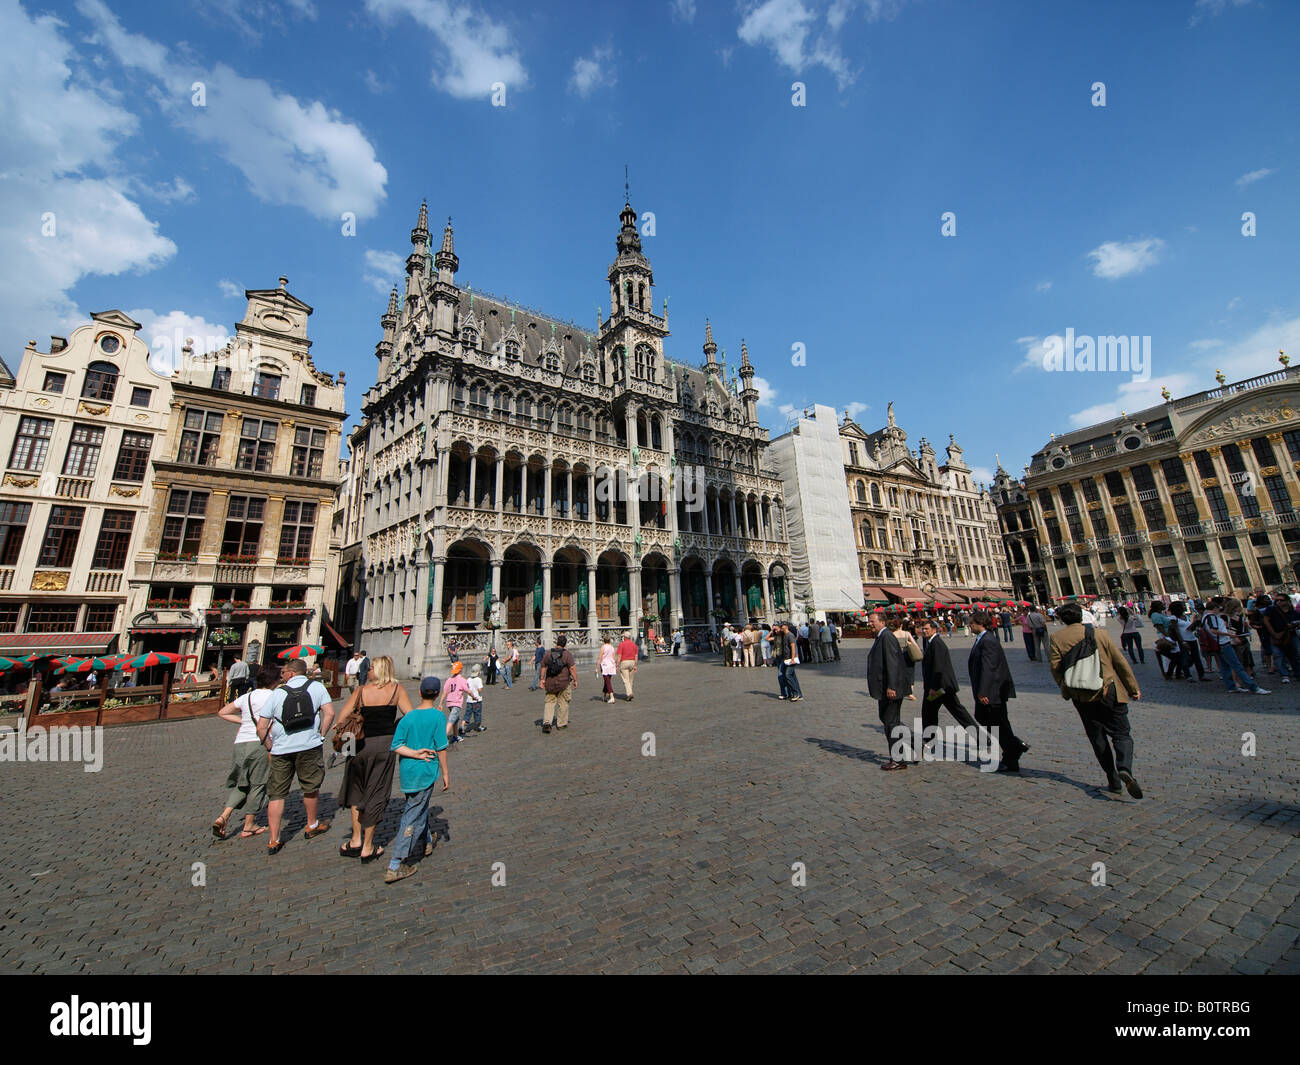 Grand Place the main city square Brussels Belgium with many people tourists admiring the 17th century buildings Stock Photo